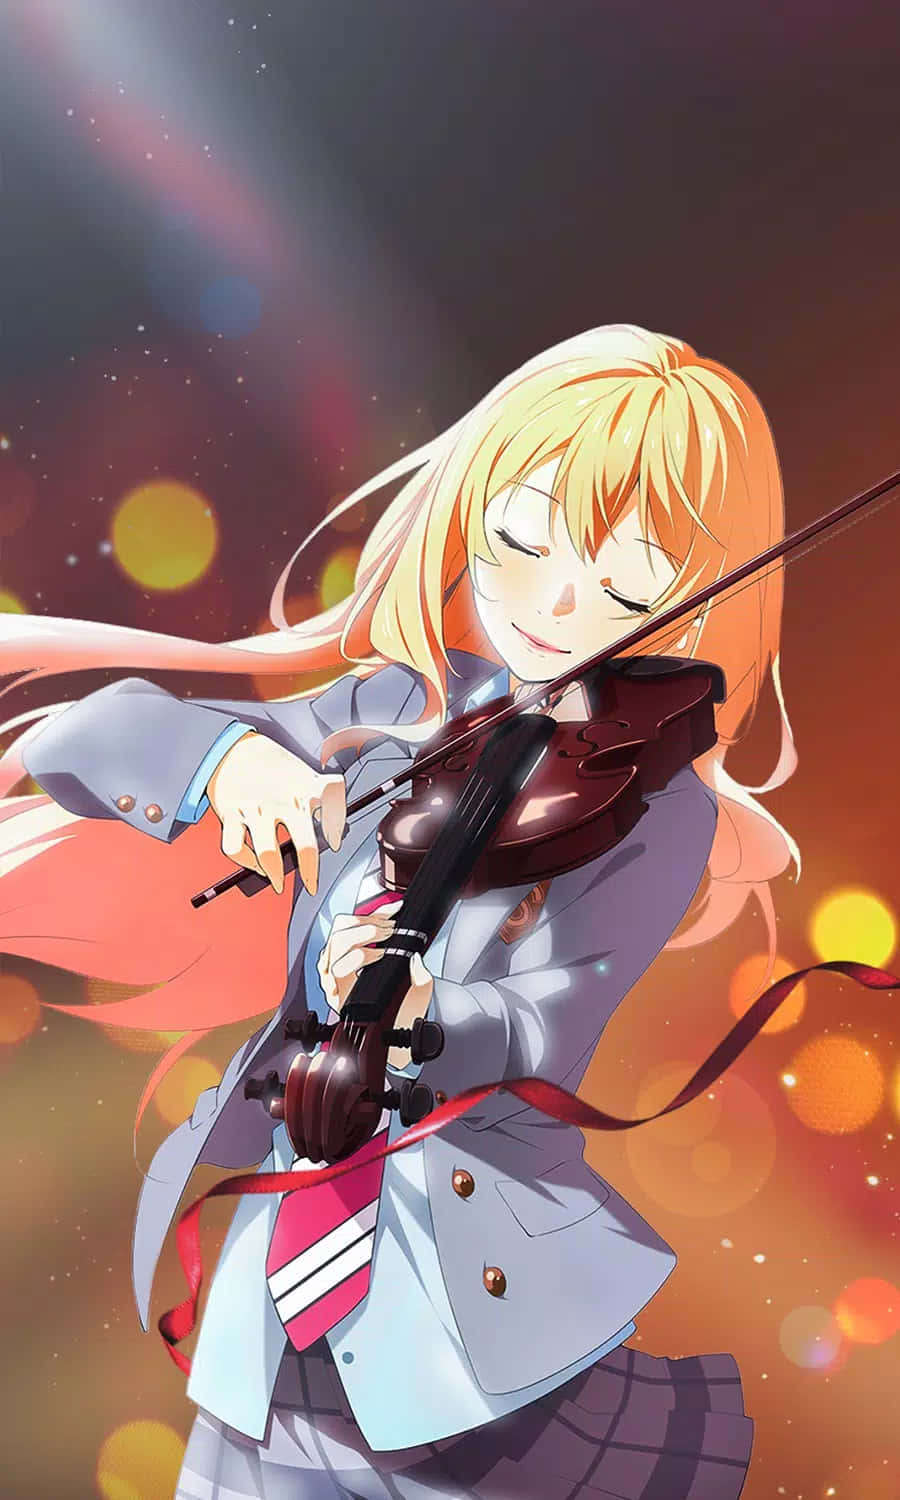 Playing The Violin For Girls